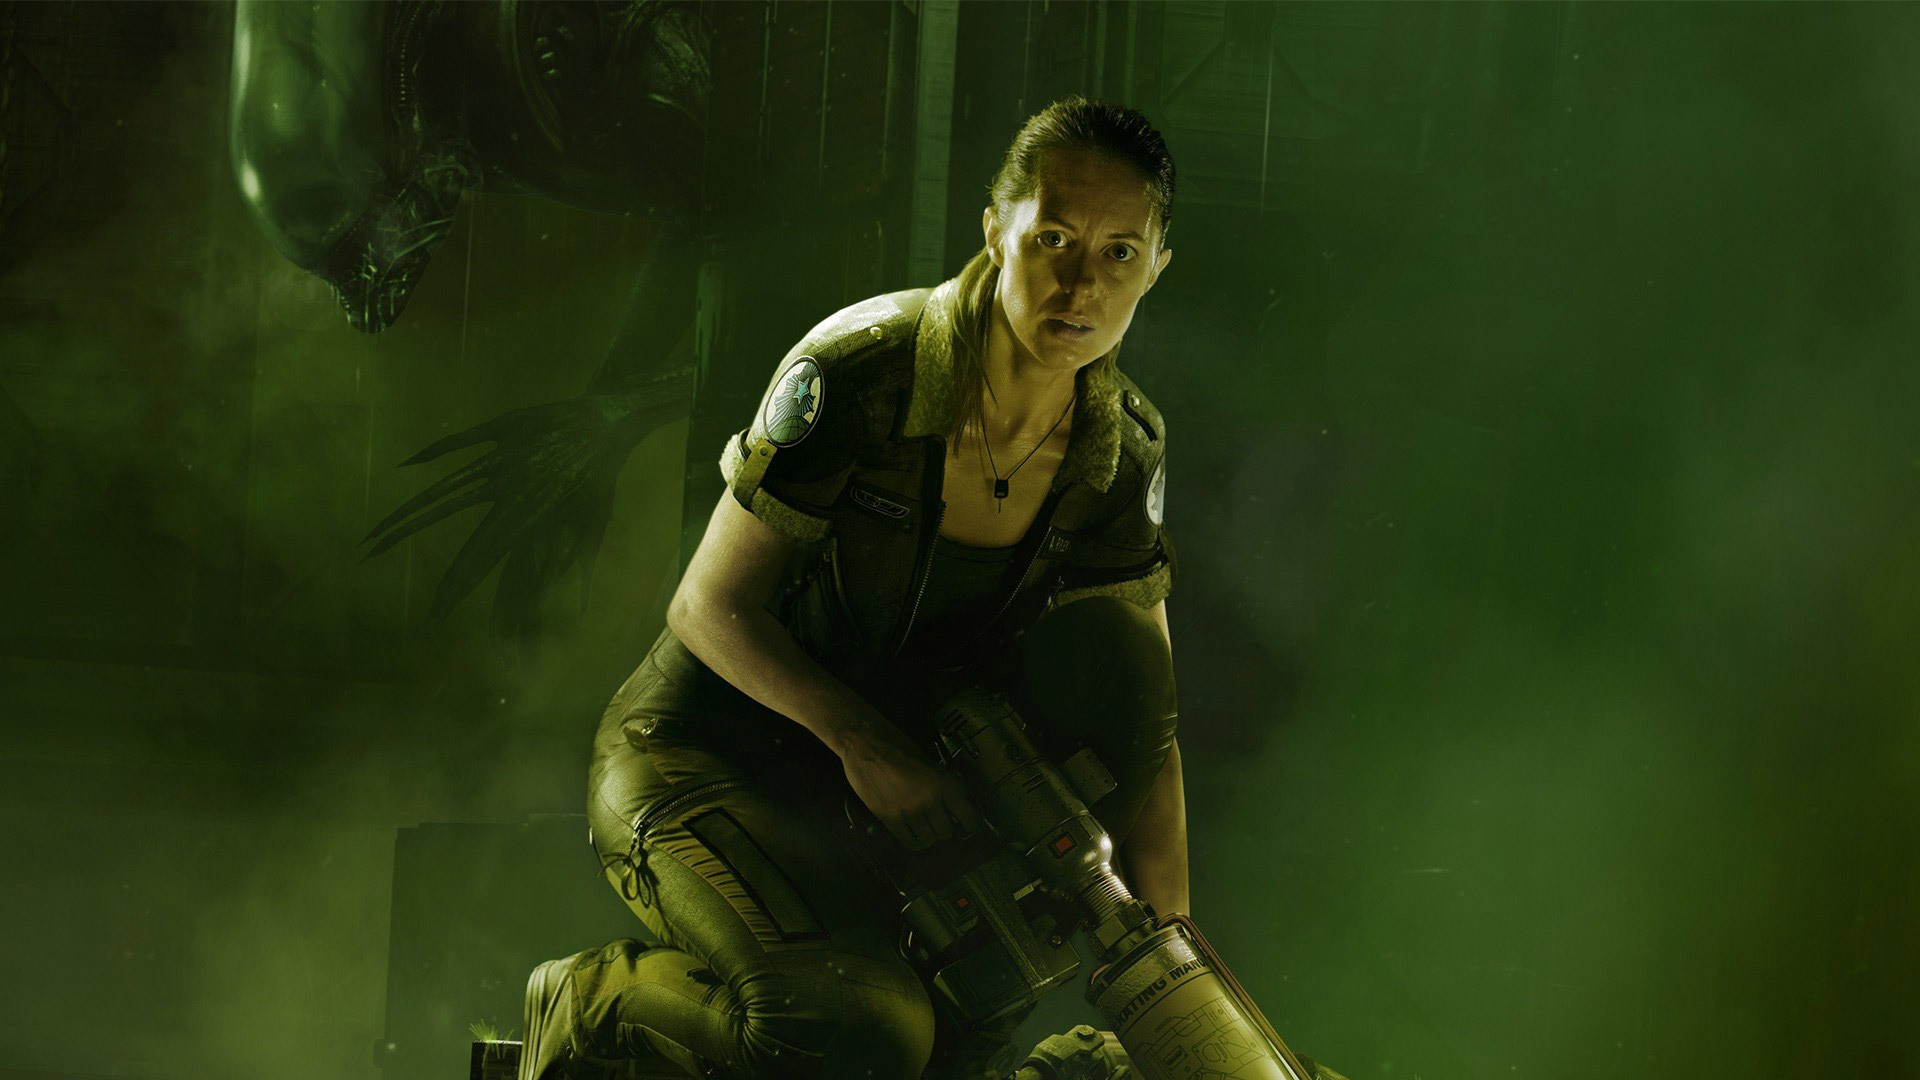 Alien Isolation Wallpapers High Quality